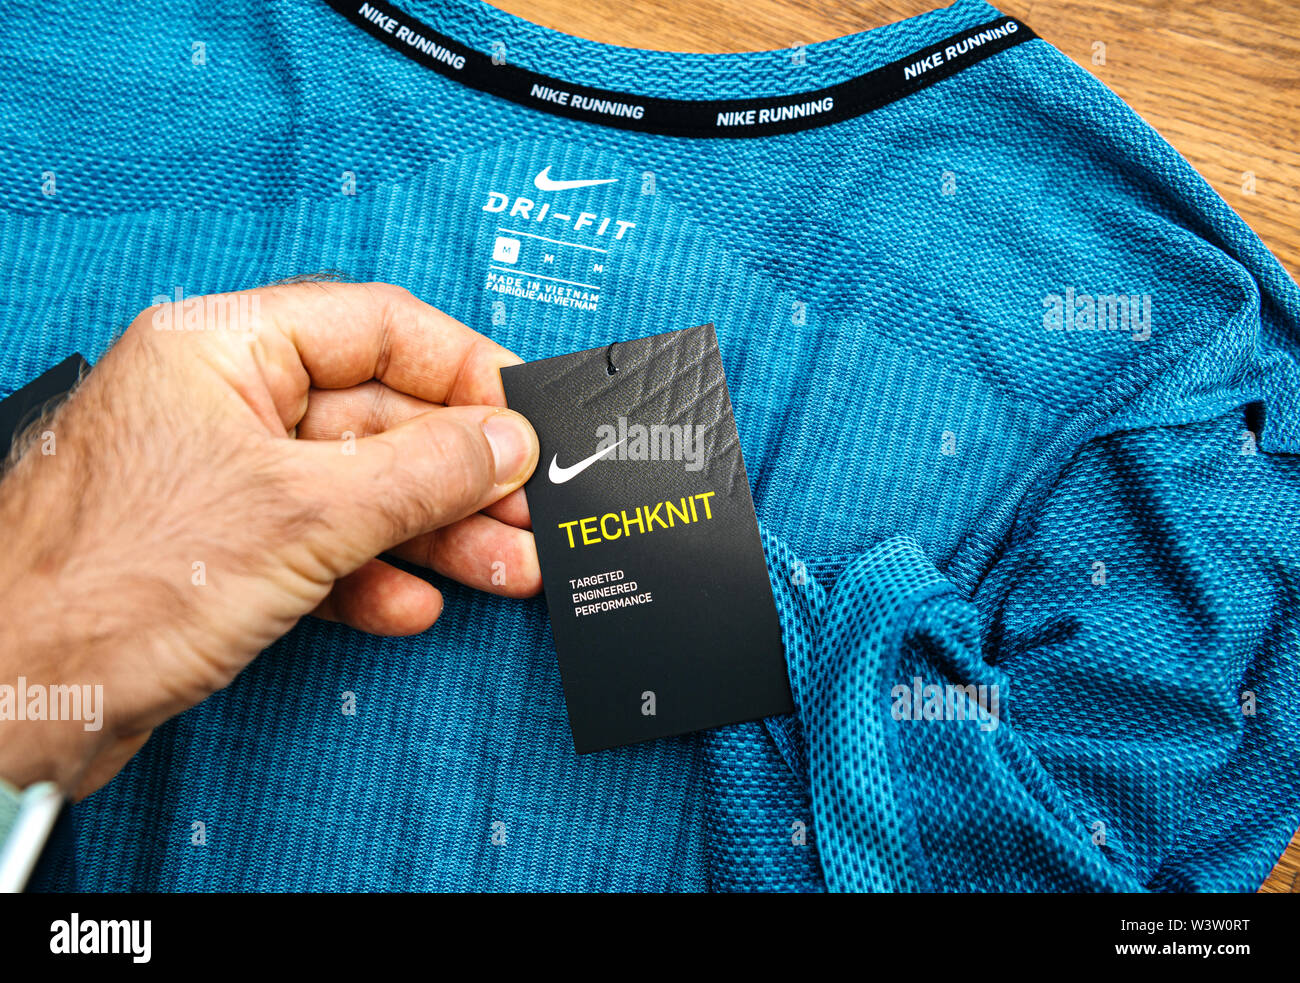 https://c8.alamy.com/comp/W3W0RT/paris-france-jul-13-2019-man-hand-pov-unboxing-unpacking-admiring-latest-sport-clothes-equipment-for-running-manufactured-byu-nike-sportswear-tag-with-techknit-specification-W3W0RT.jpg